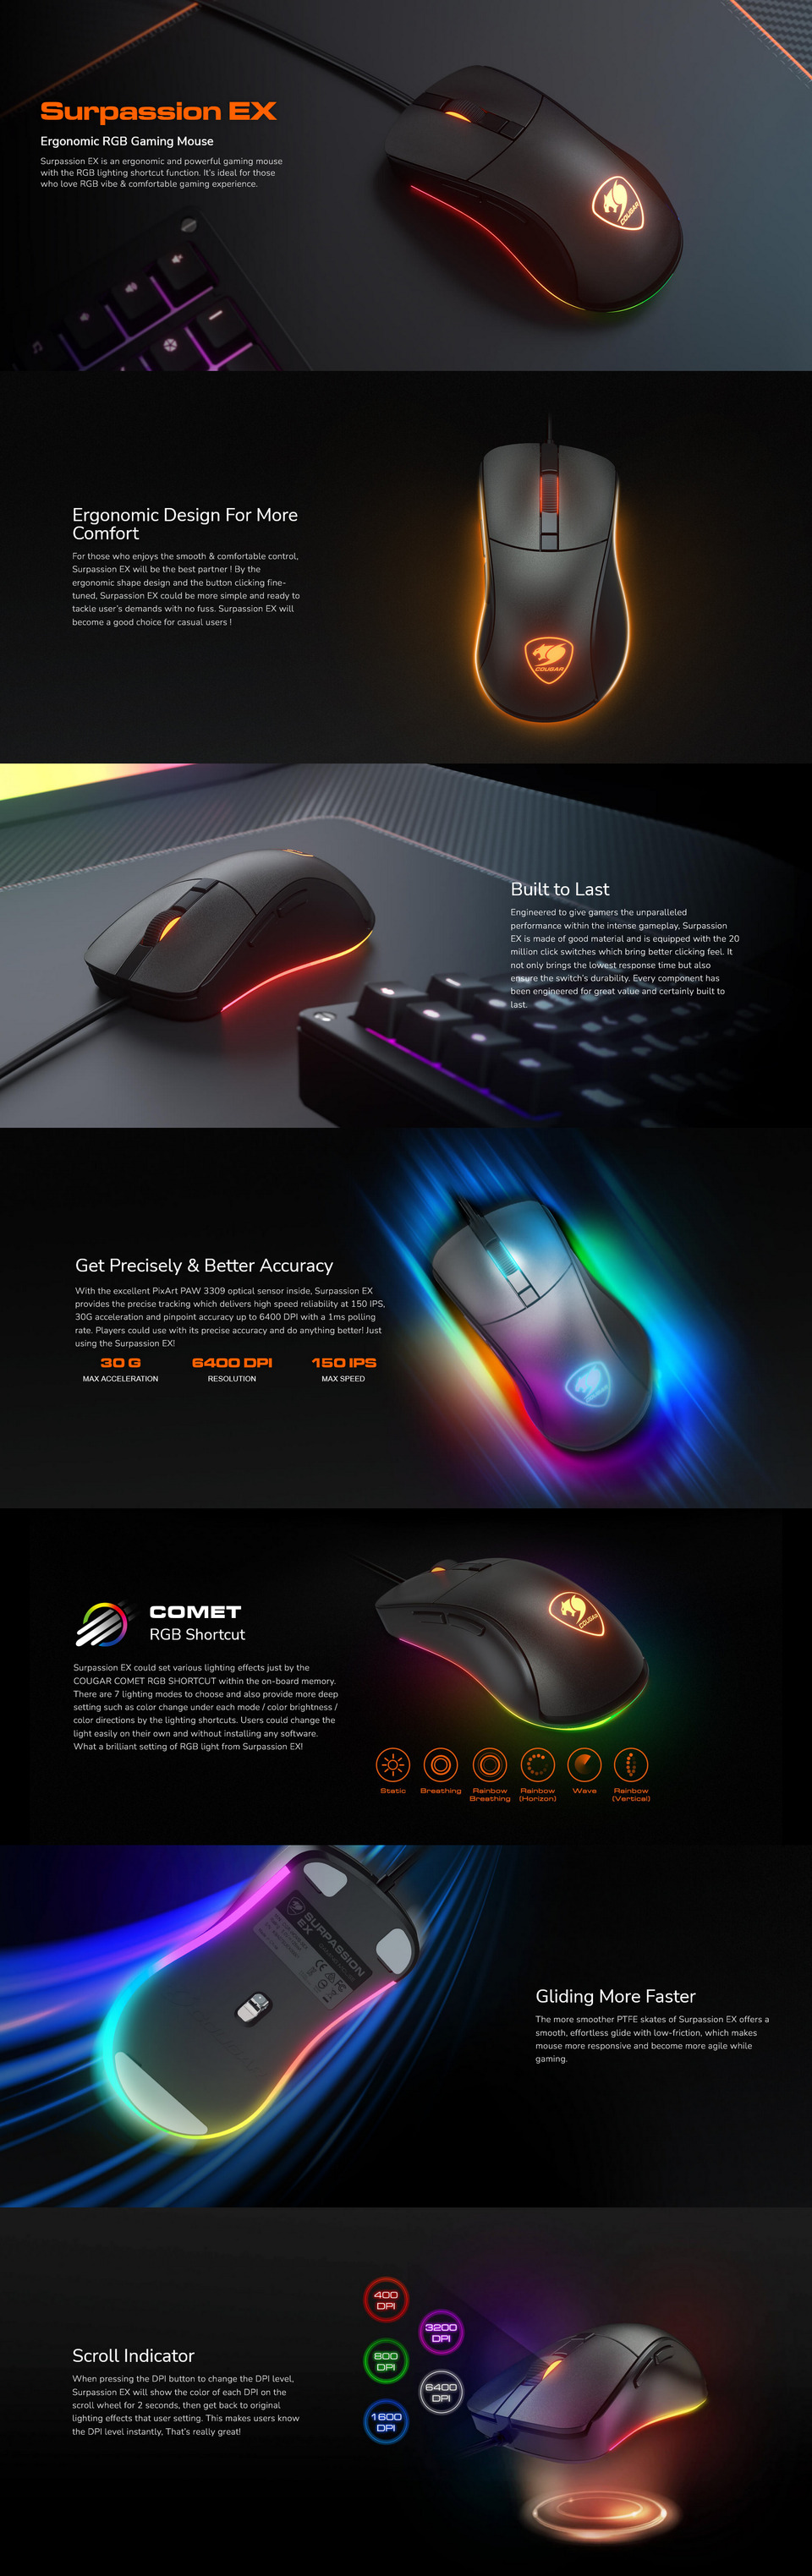 cougar surpassion ex usb gaming mouse